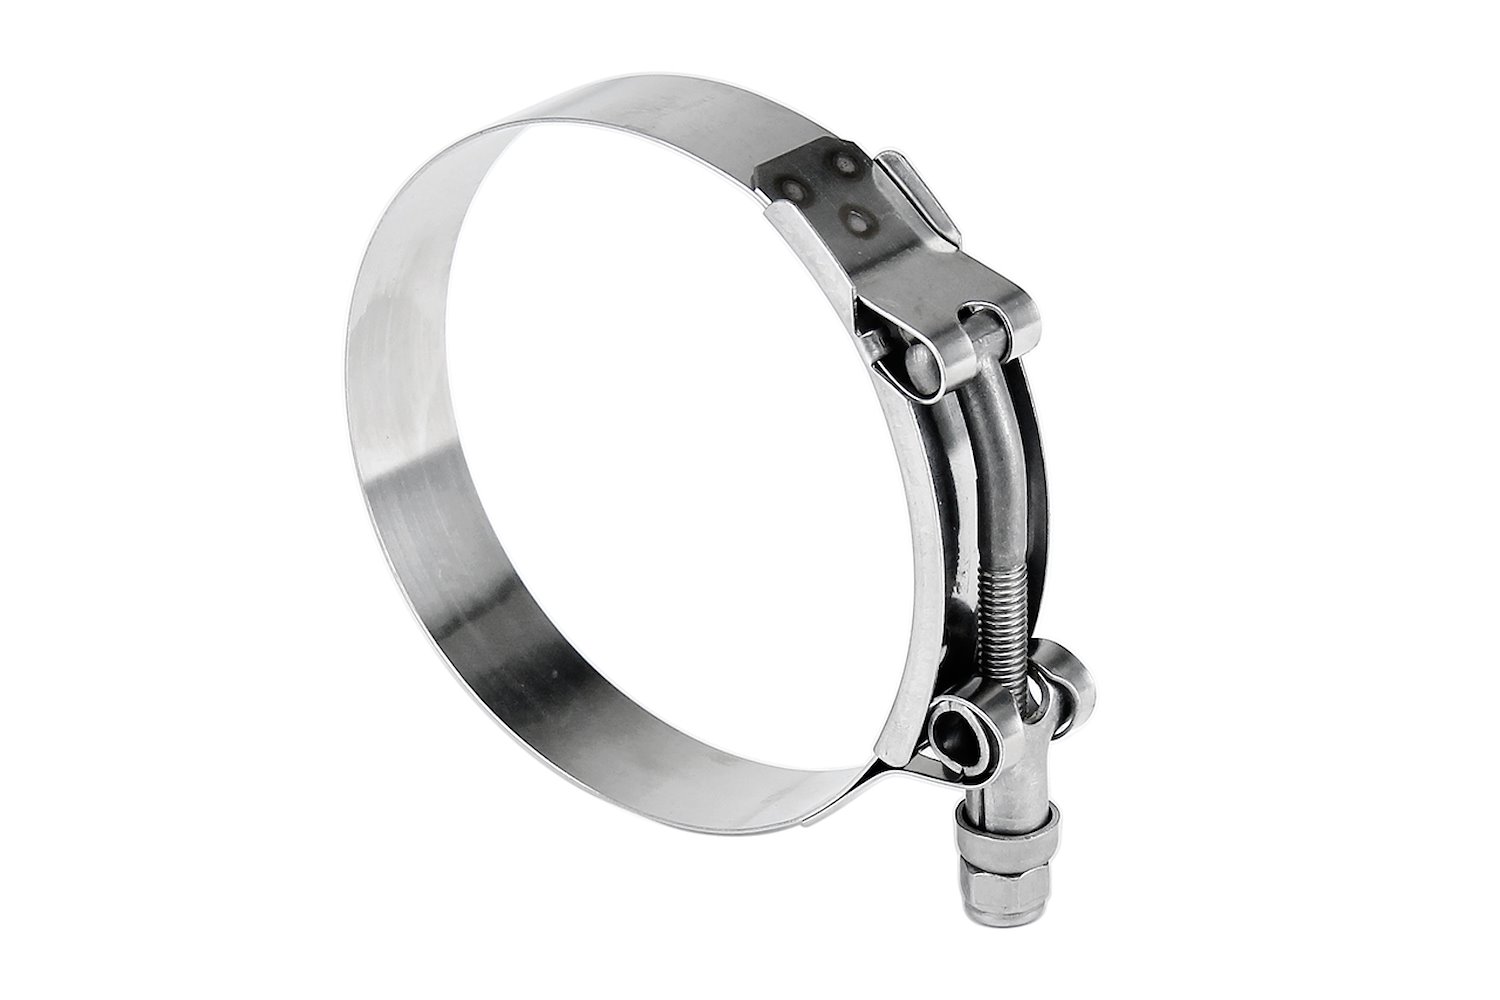 SSTC-67-75 100-Percent Stainless Steel T-Bolt Hose Clamp, Size #56, Effective Range: 2.64 in.-2.95 in.